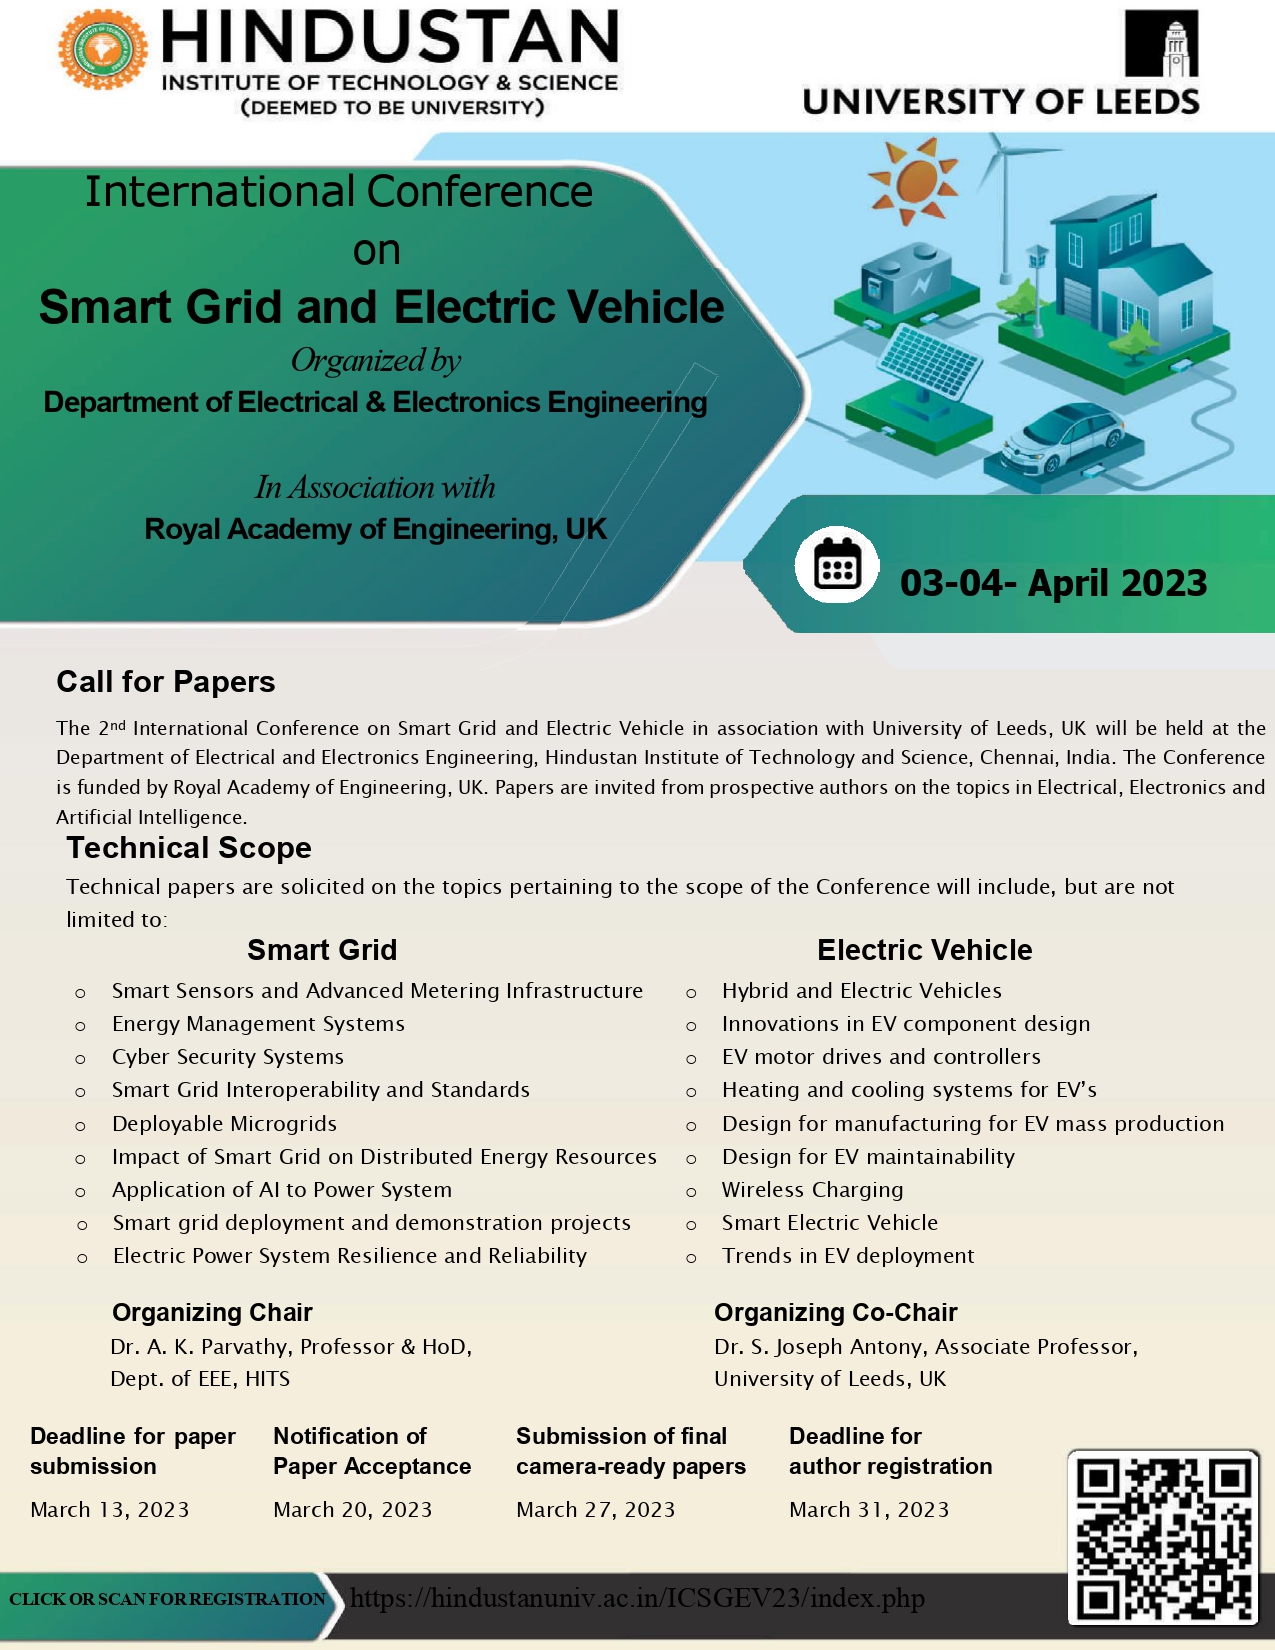 International Conference on Smart Grid and Electric Vehicle ICSGEV 23